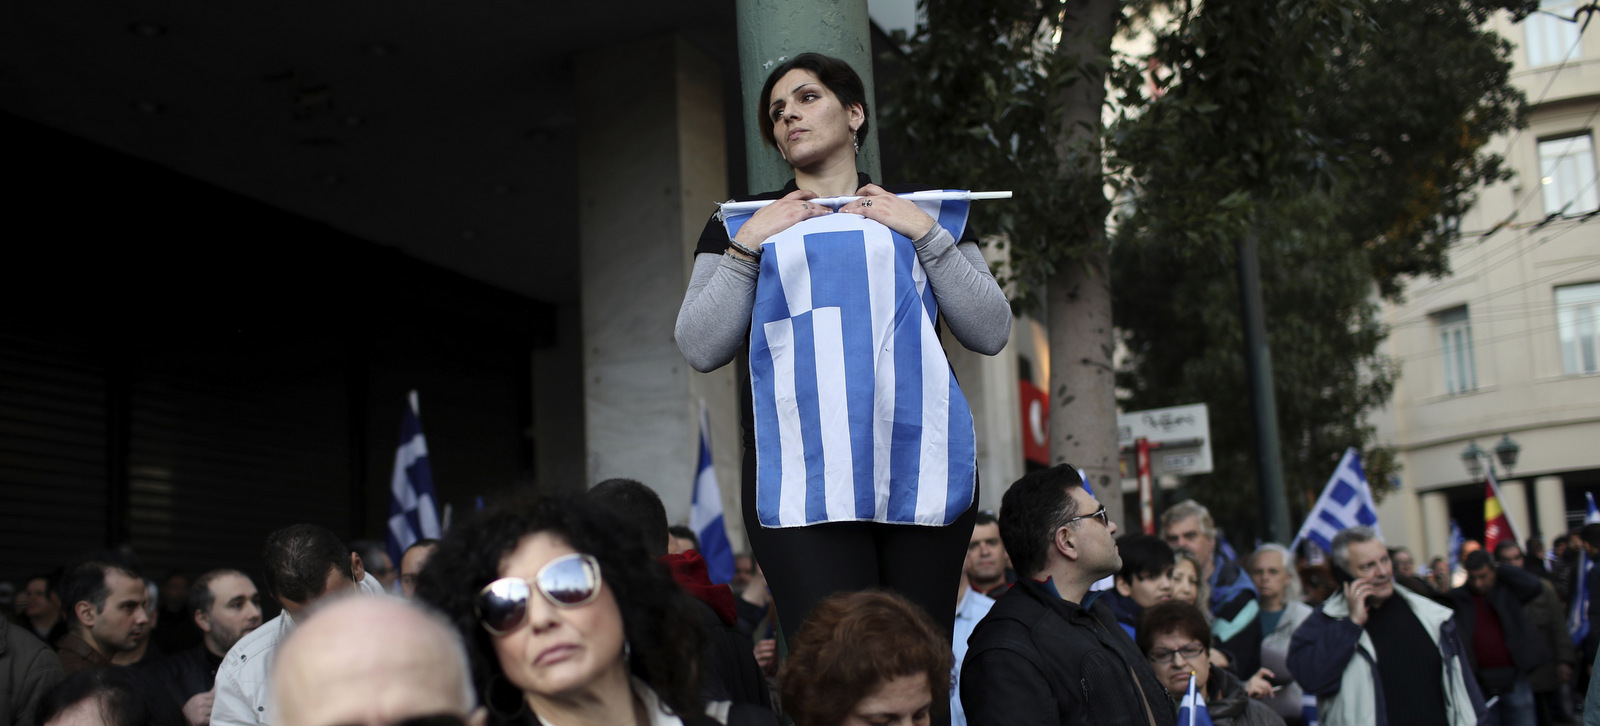 A woman holds the Greek flag as she gathers with other protesters in a rally in Athens, Sunday, Feb. 4, 2018. Protesters from across Greece converged Sunday on Athens' main square outside parliament to protest a potential Greek compromise in a dispute with neighboring Macedonia over the former Yugoslav republic's official name. (AP/Petros Giannakouris)